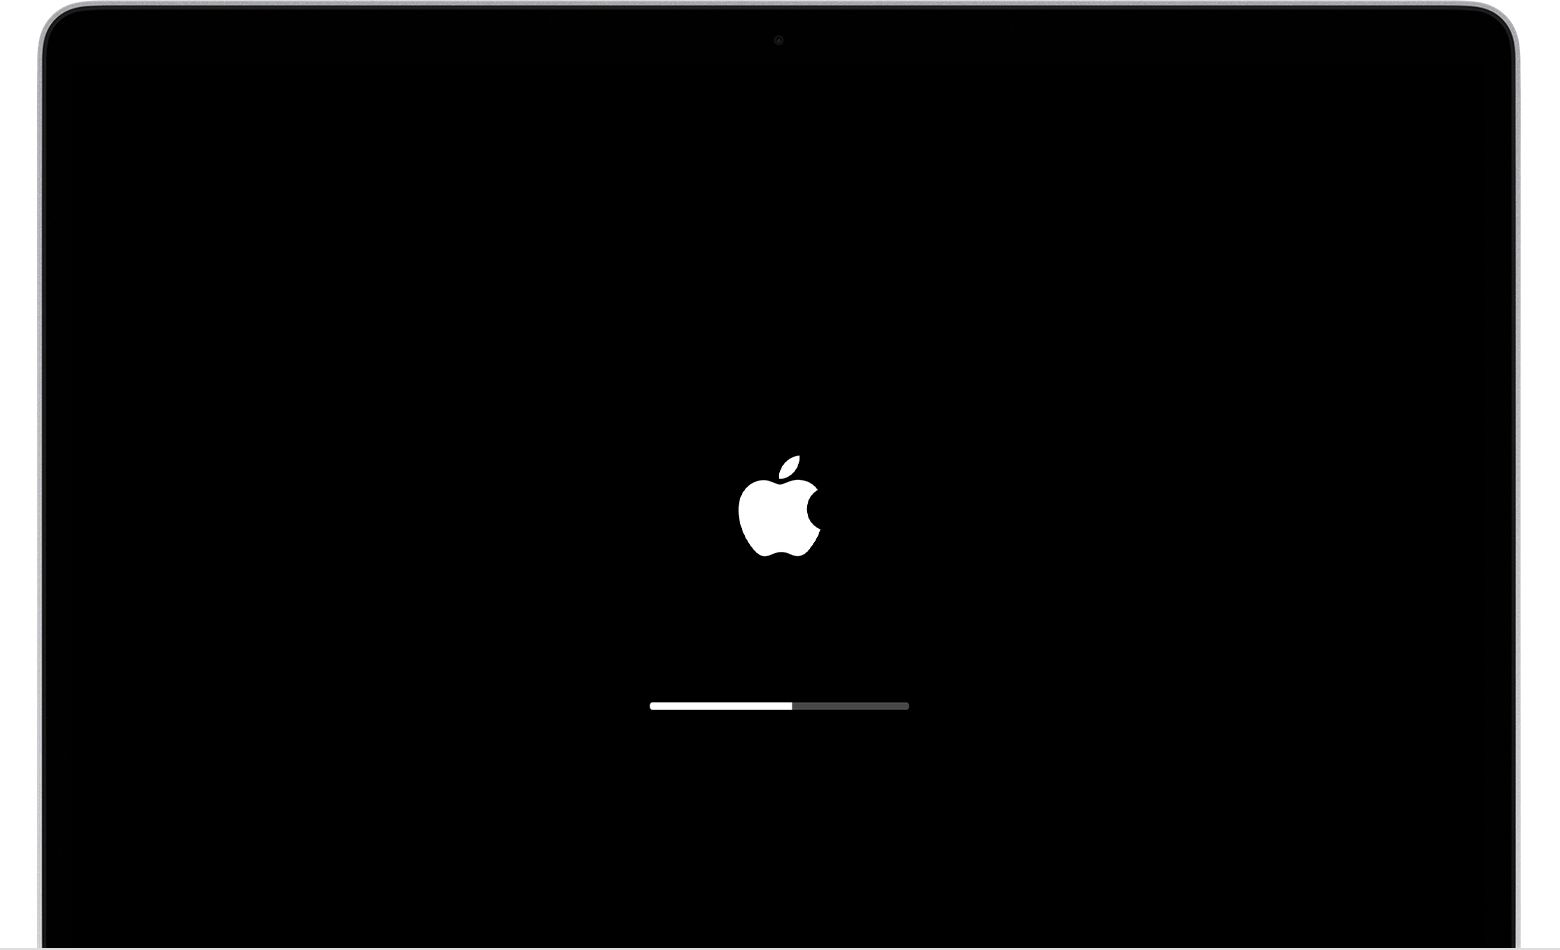 Shut down your MacBook Pro.
Turn it on and immediately press and hold the Shift key until you see the Apple logo or a progress indicator.